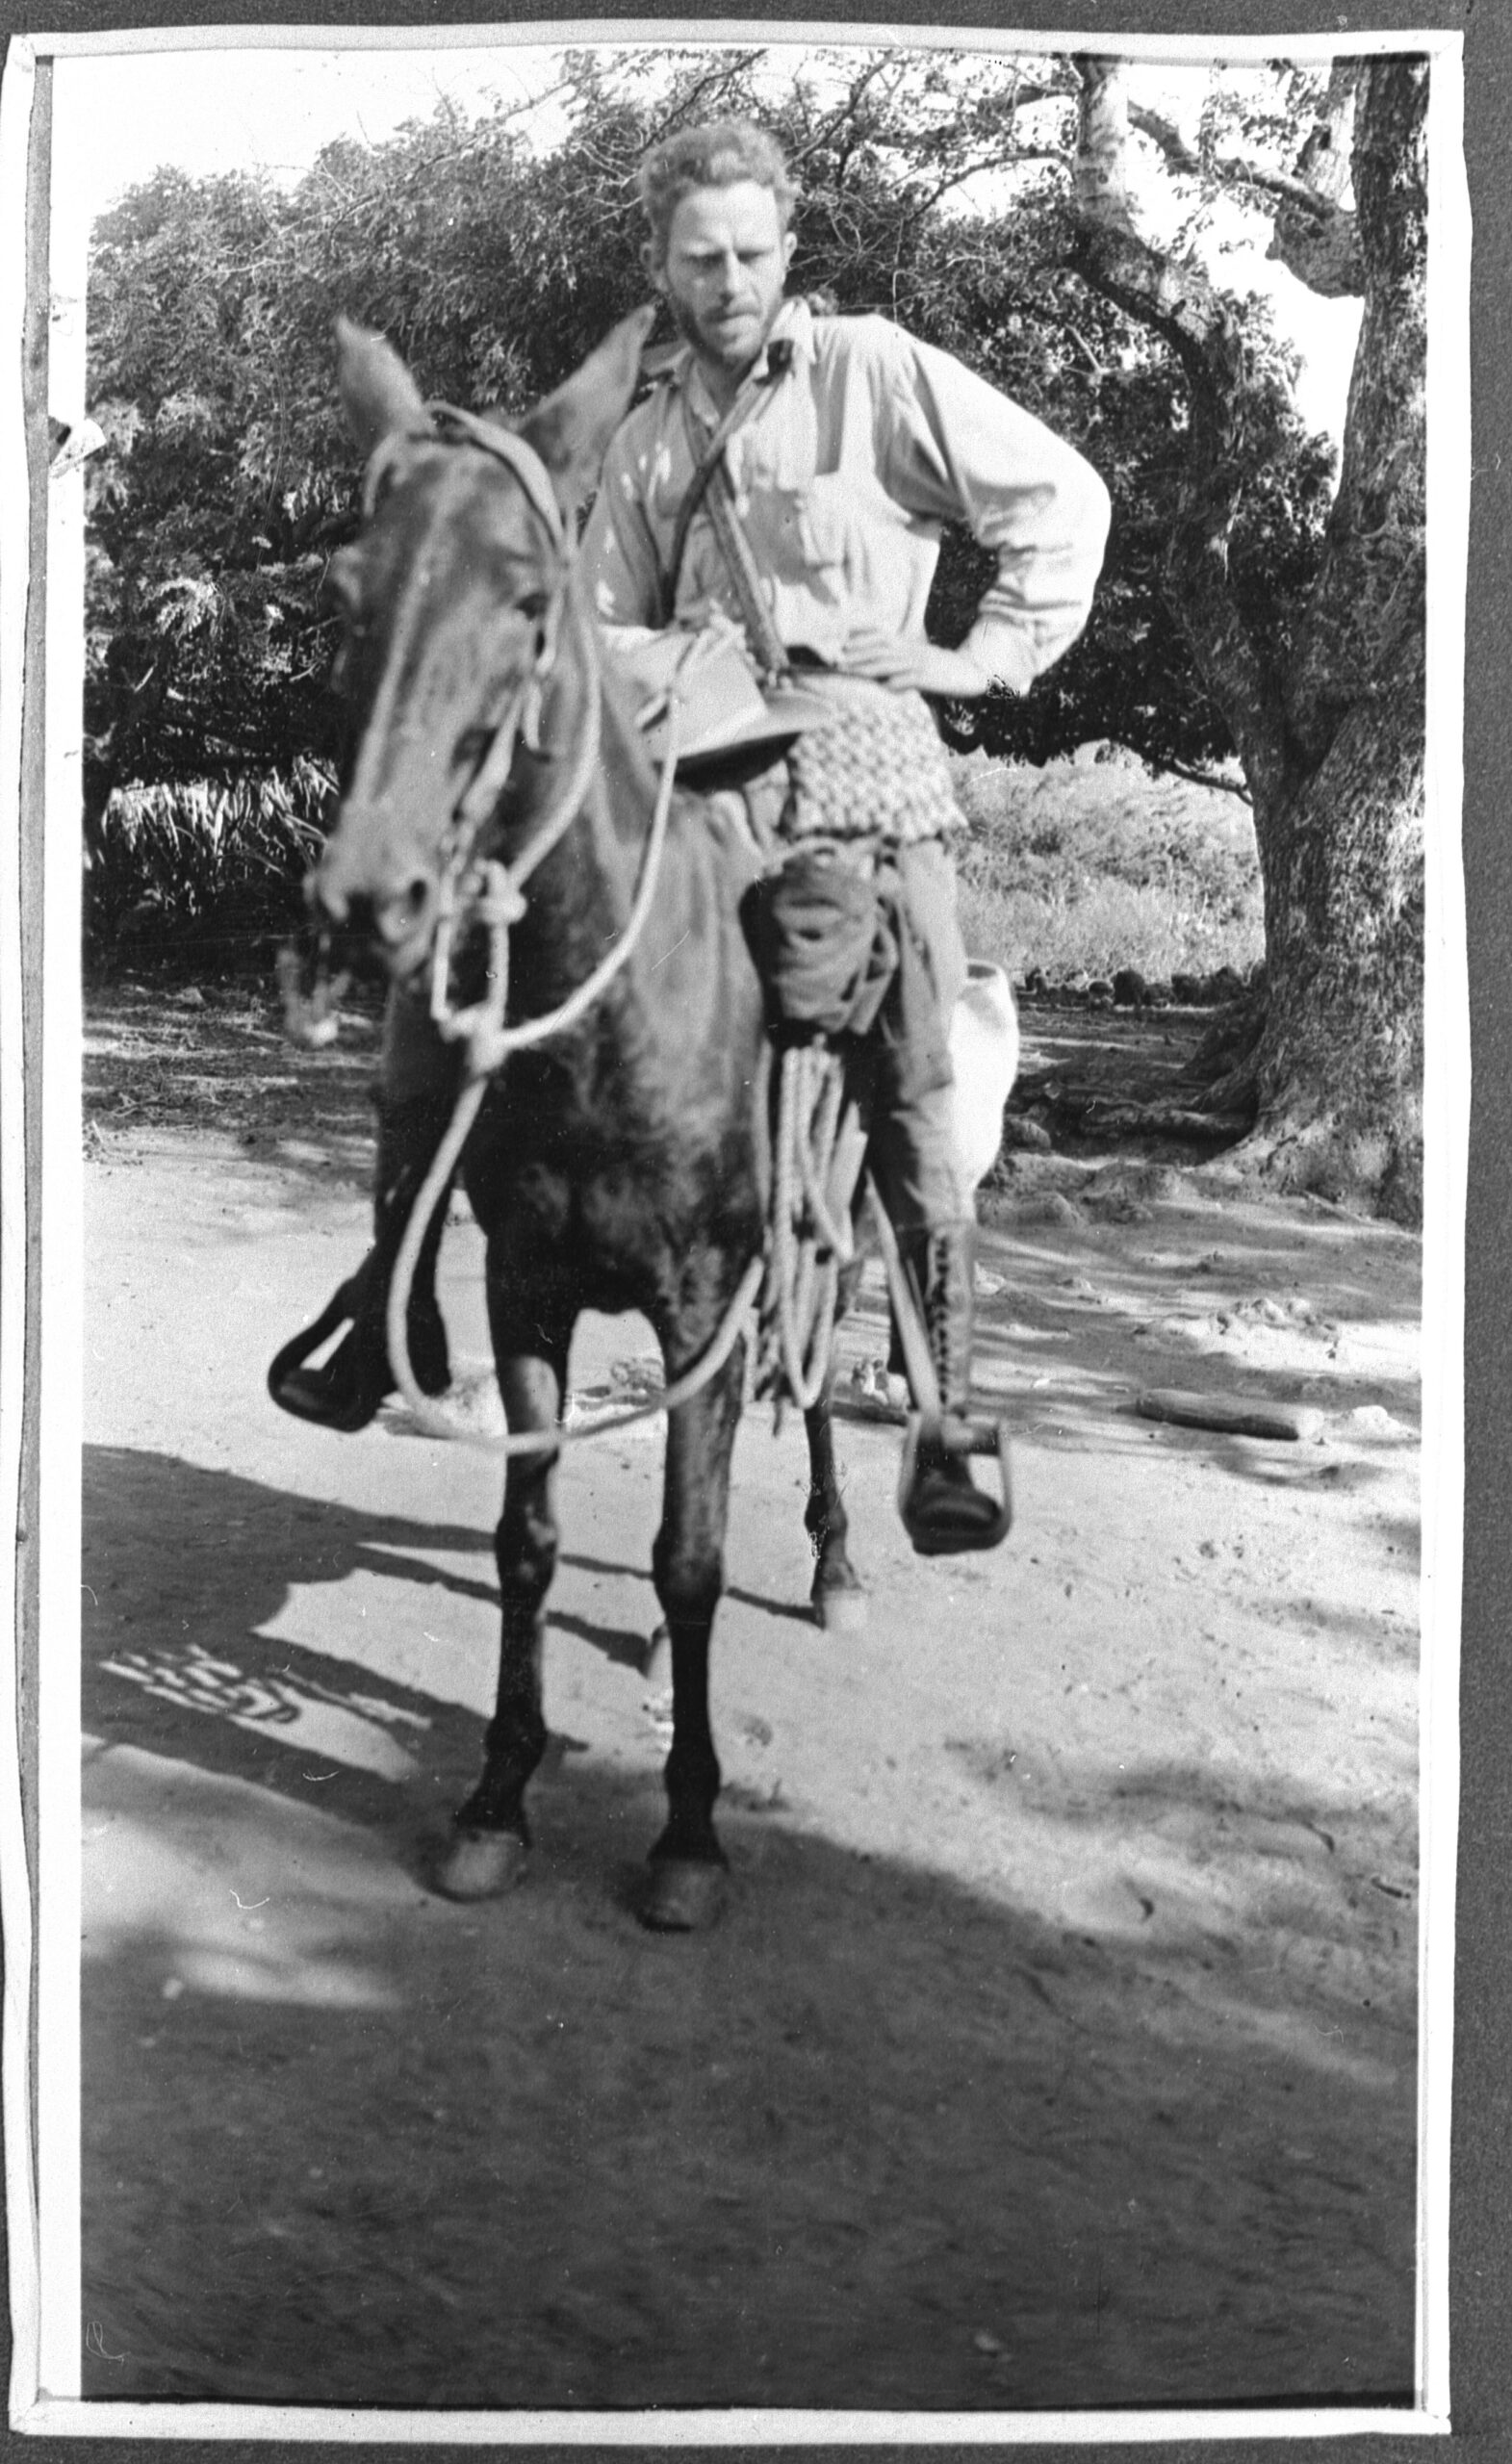 Black and white photo of a man riding a horse